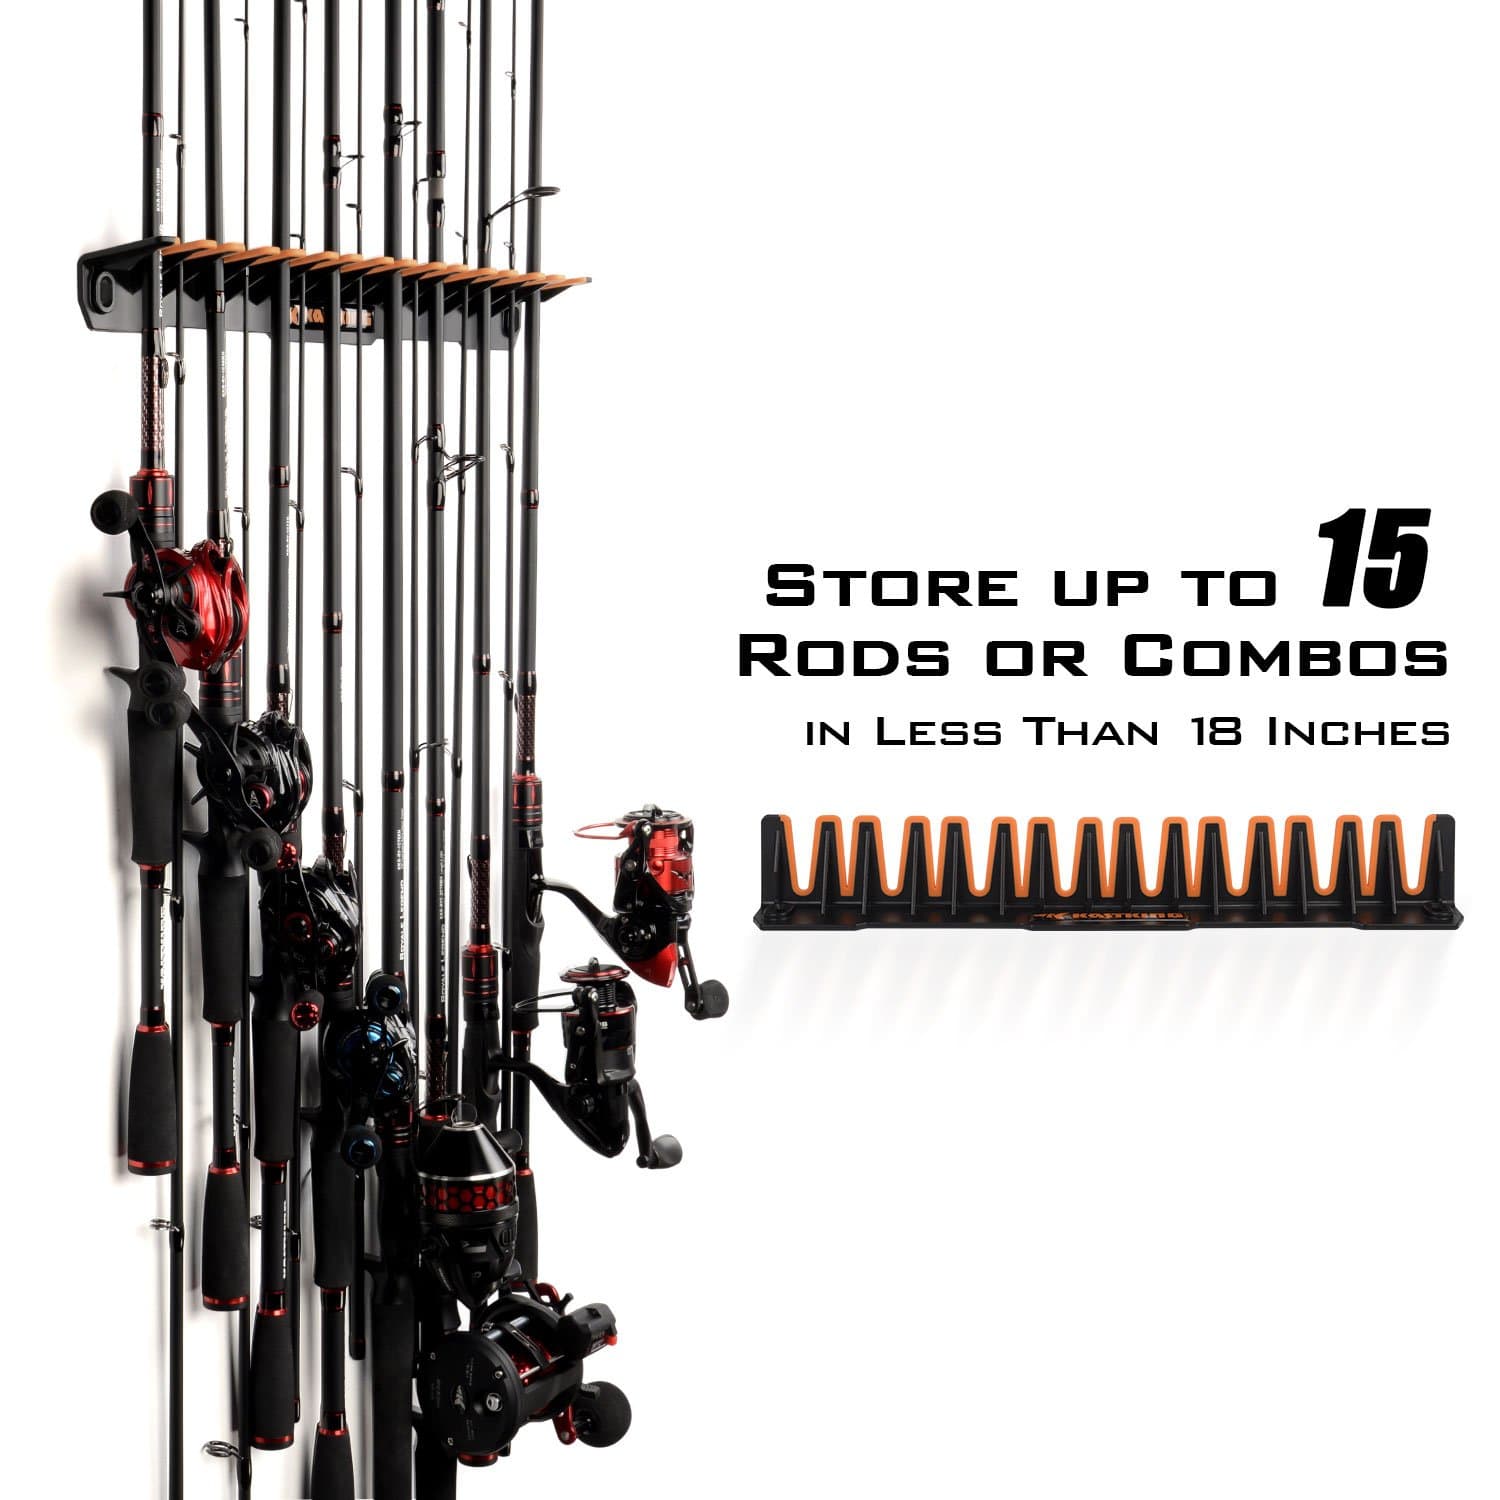 How To Store A Fishing Rod